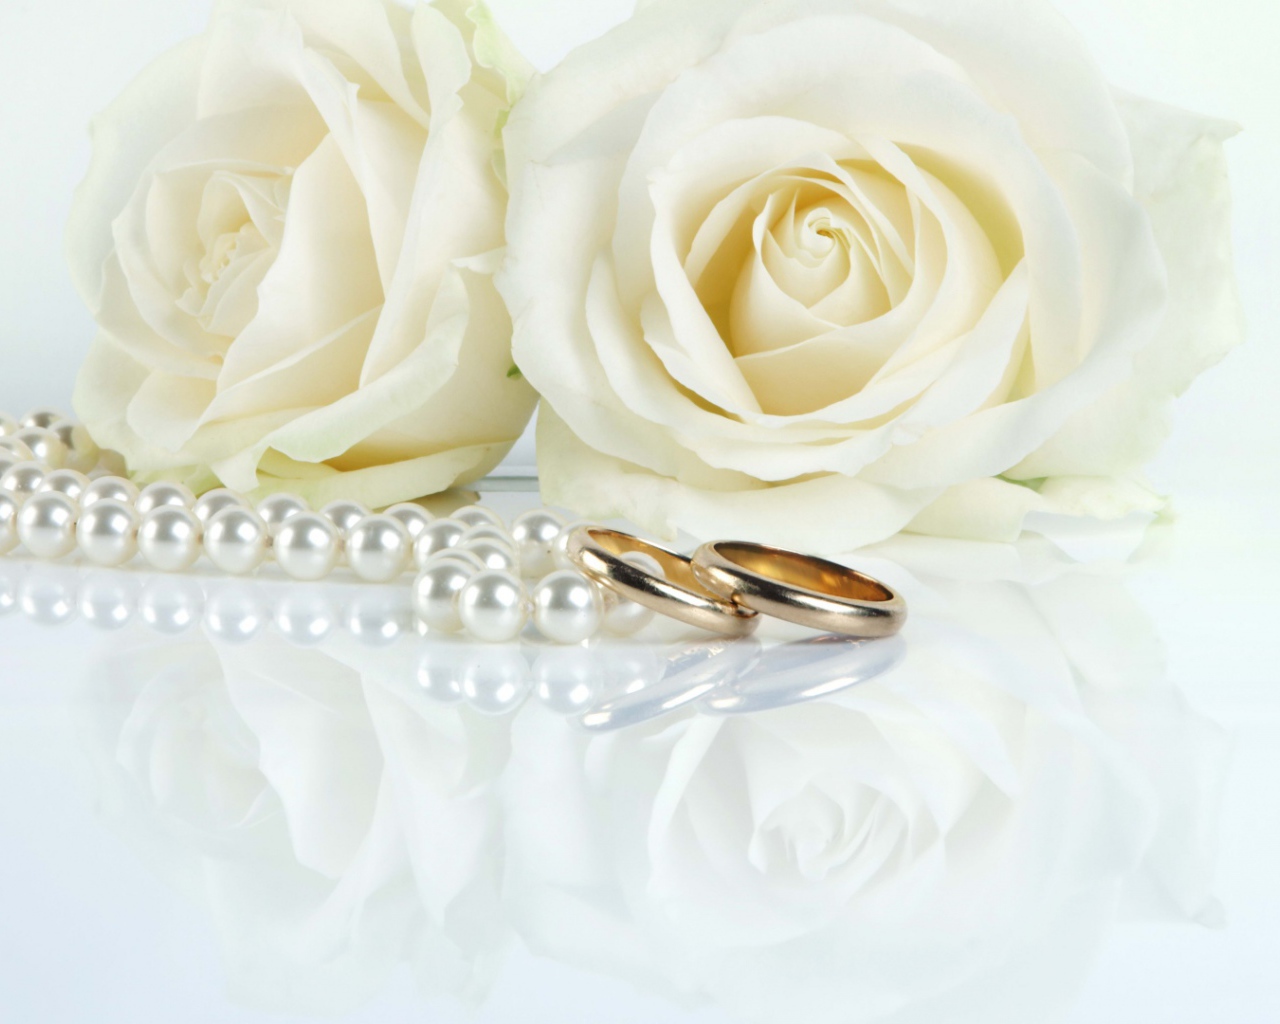 White roses and wedding rings